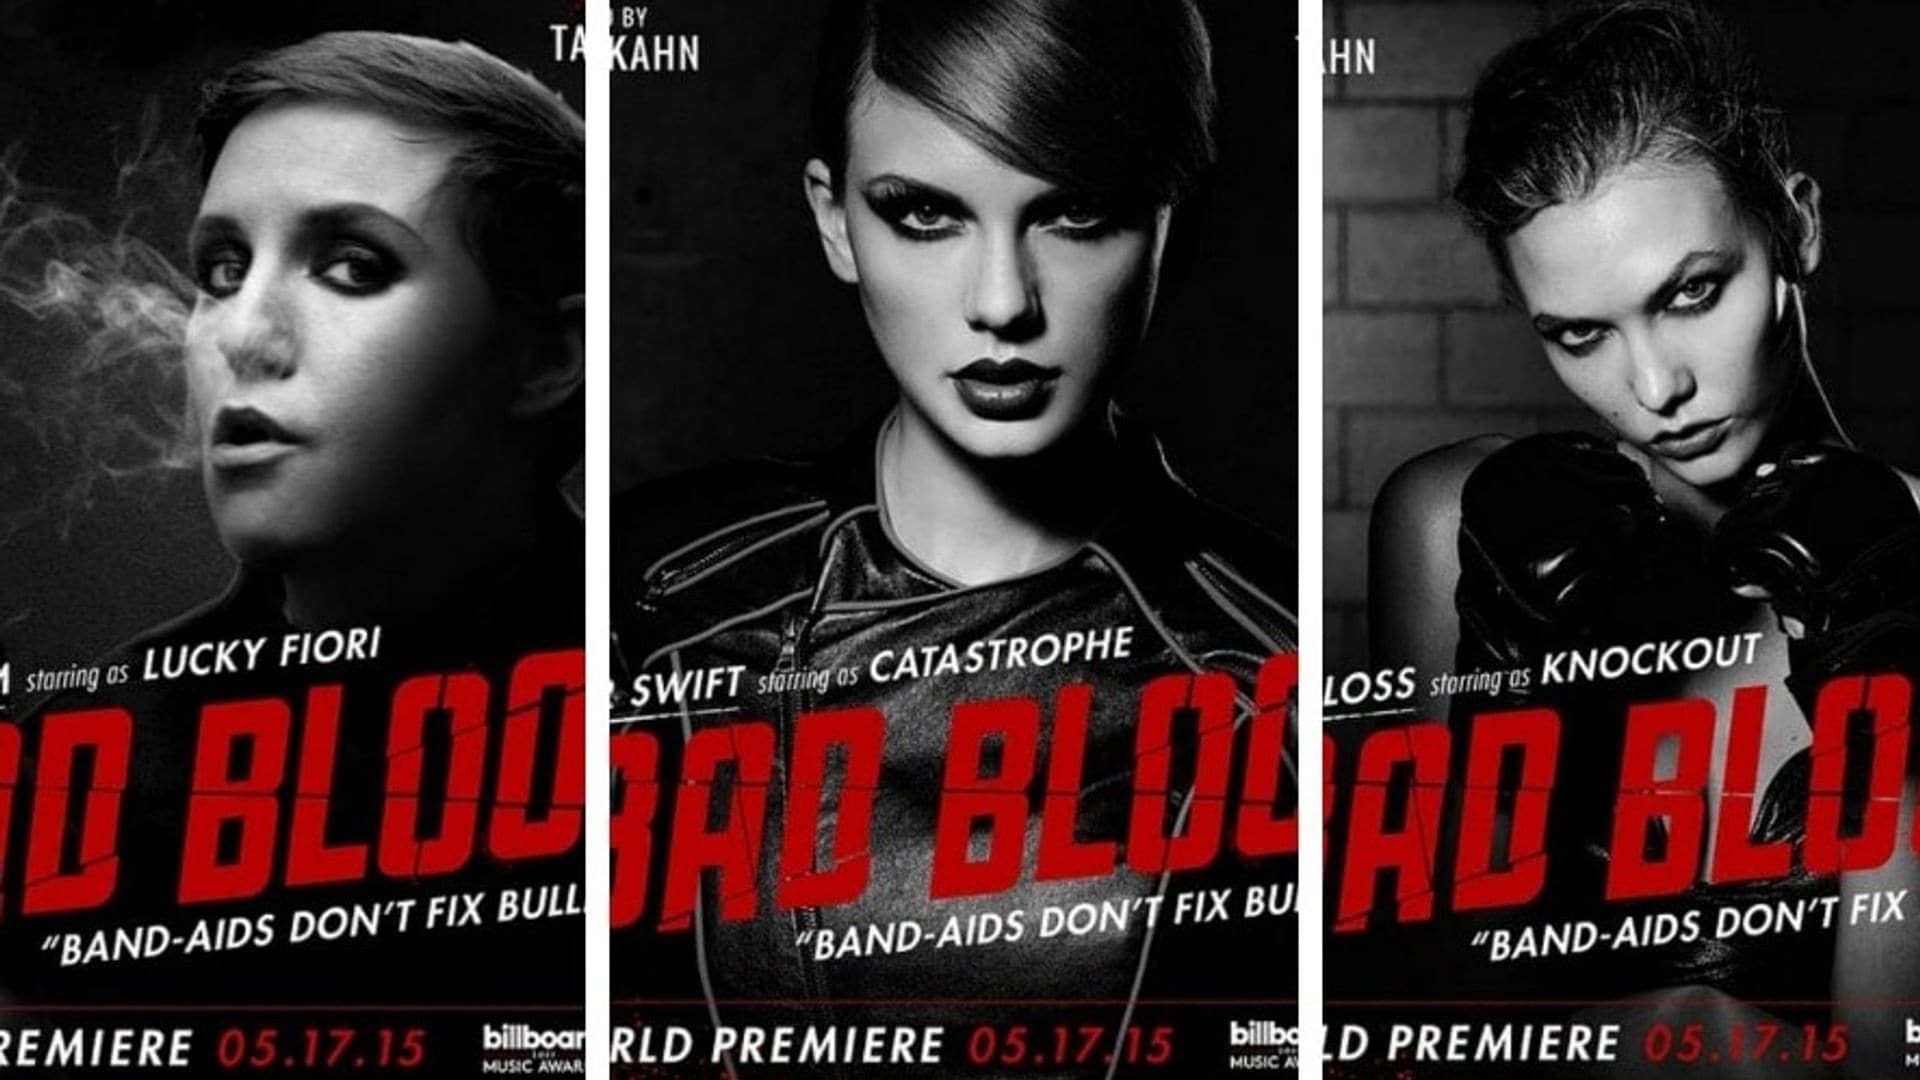 Stars in Taylor Swift's 'Bad Blood' video: Lena Dunham, Jessica Alba and more